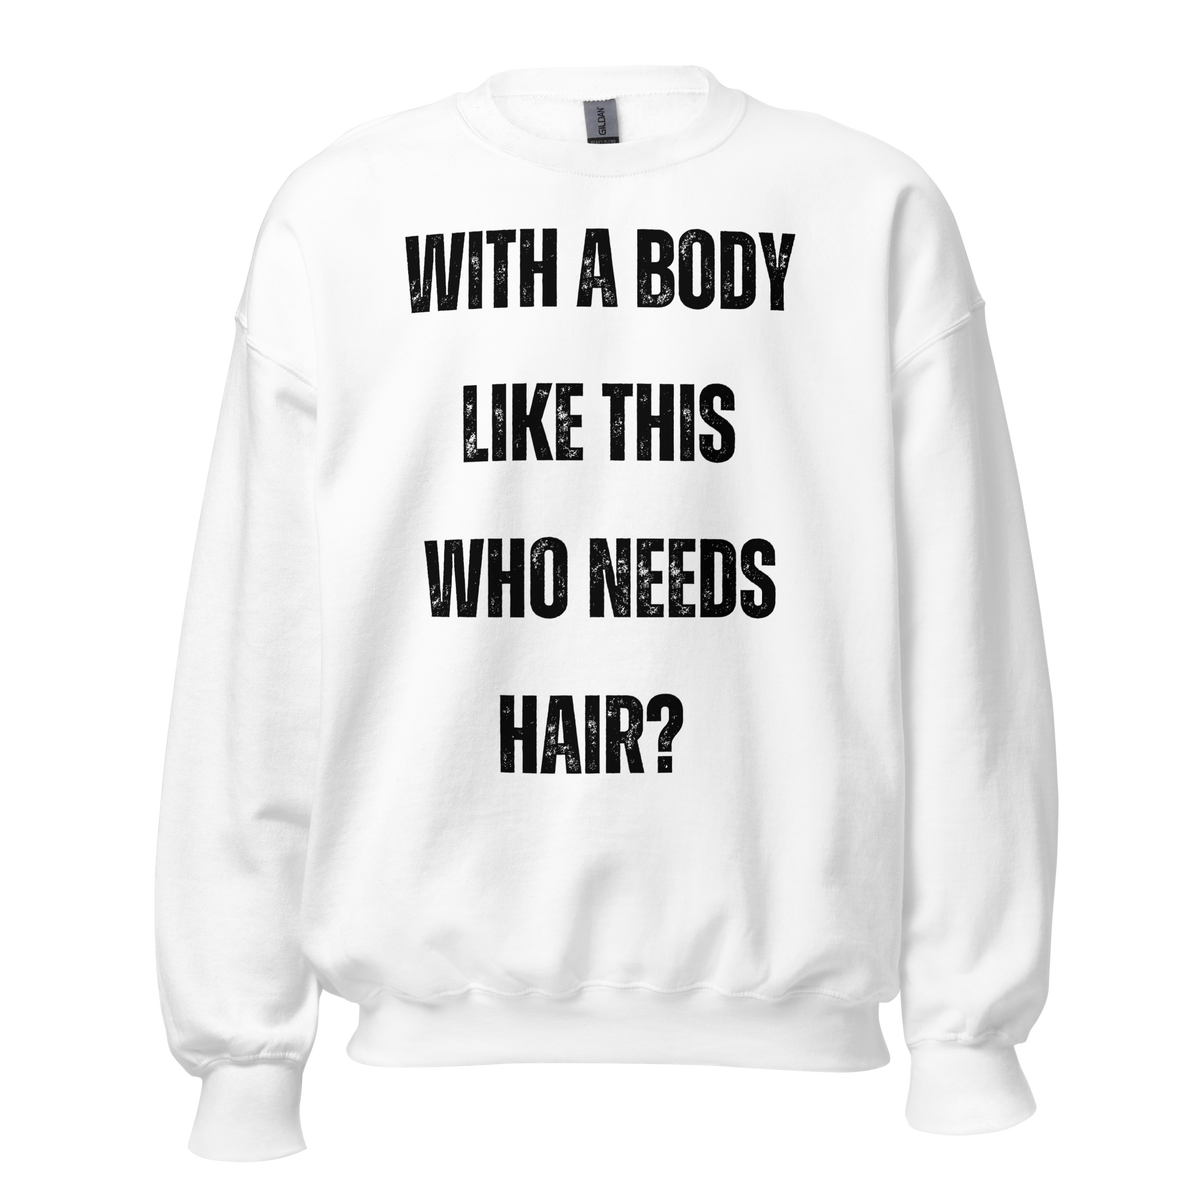 With a Body Like This Who Needs Hair, Funny Shirt for Men, Fathers Day Gift, Husband Gift, Humor Tshirt, Dad Gift, Mens Shirt, Sarcastic Tee, sweatshirt